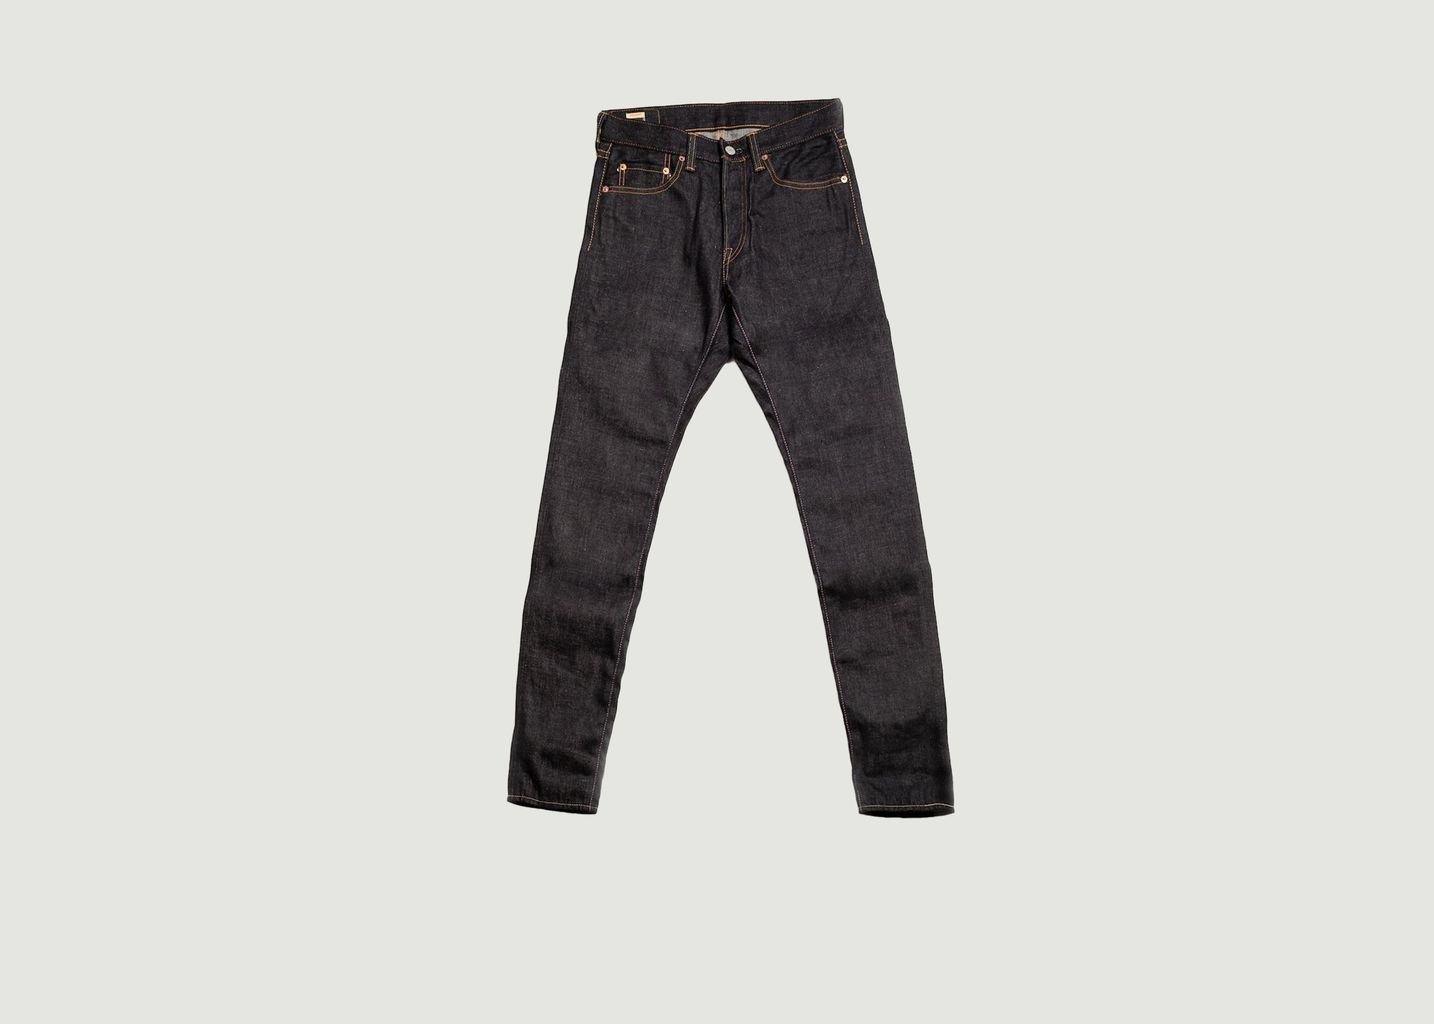 Momotaro Jeans 0405 12 Oz High Tapered Jeans